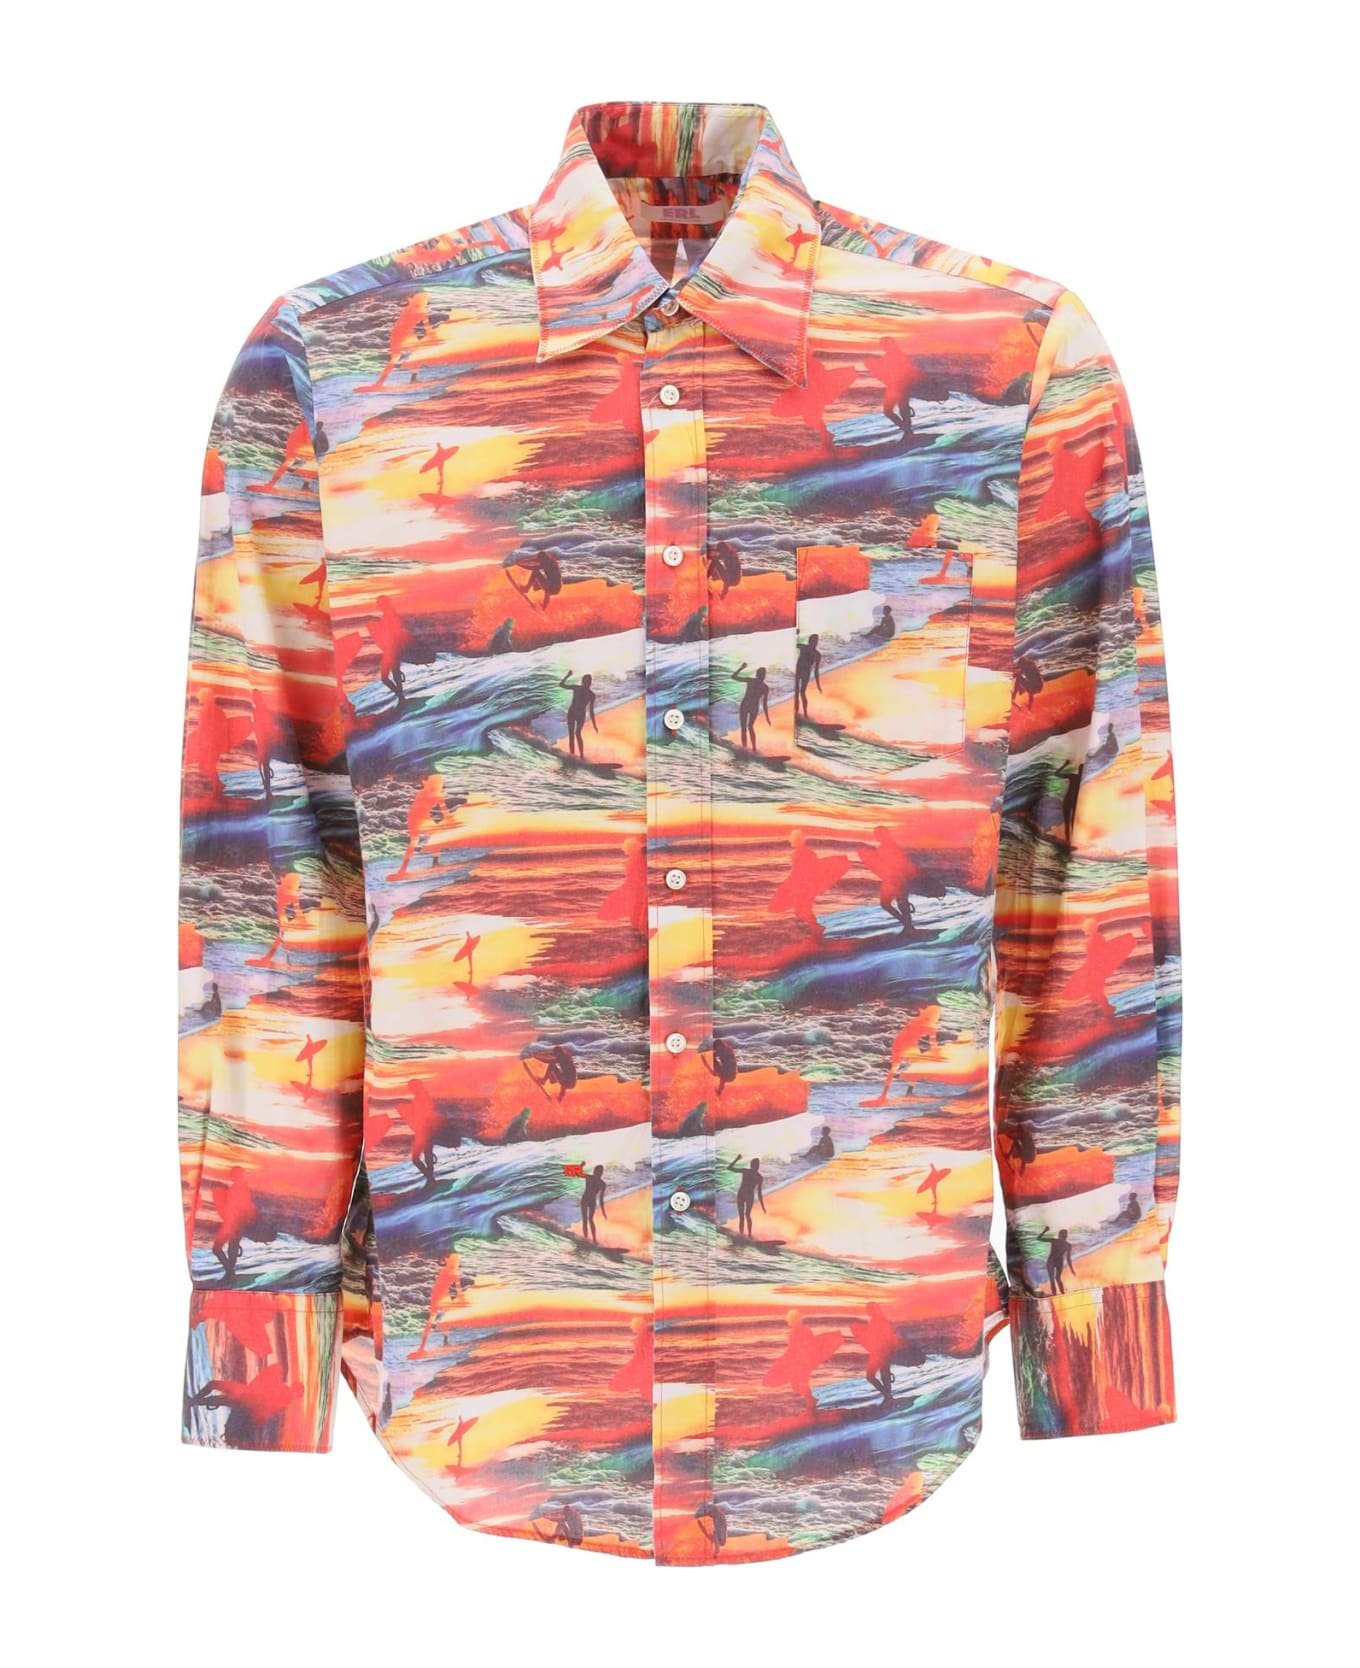 ERL Printed Cotton Shirt - ERL RED SUNSET 1 シャツ